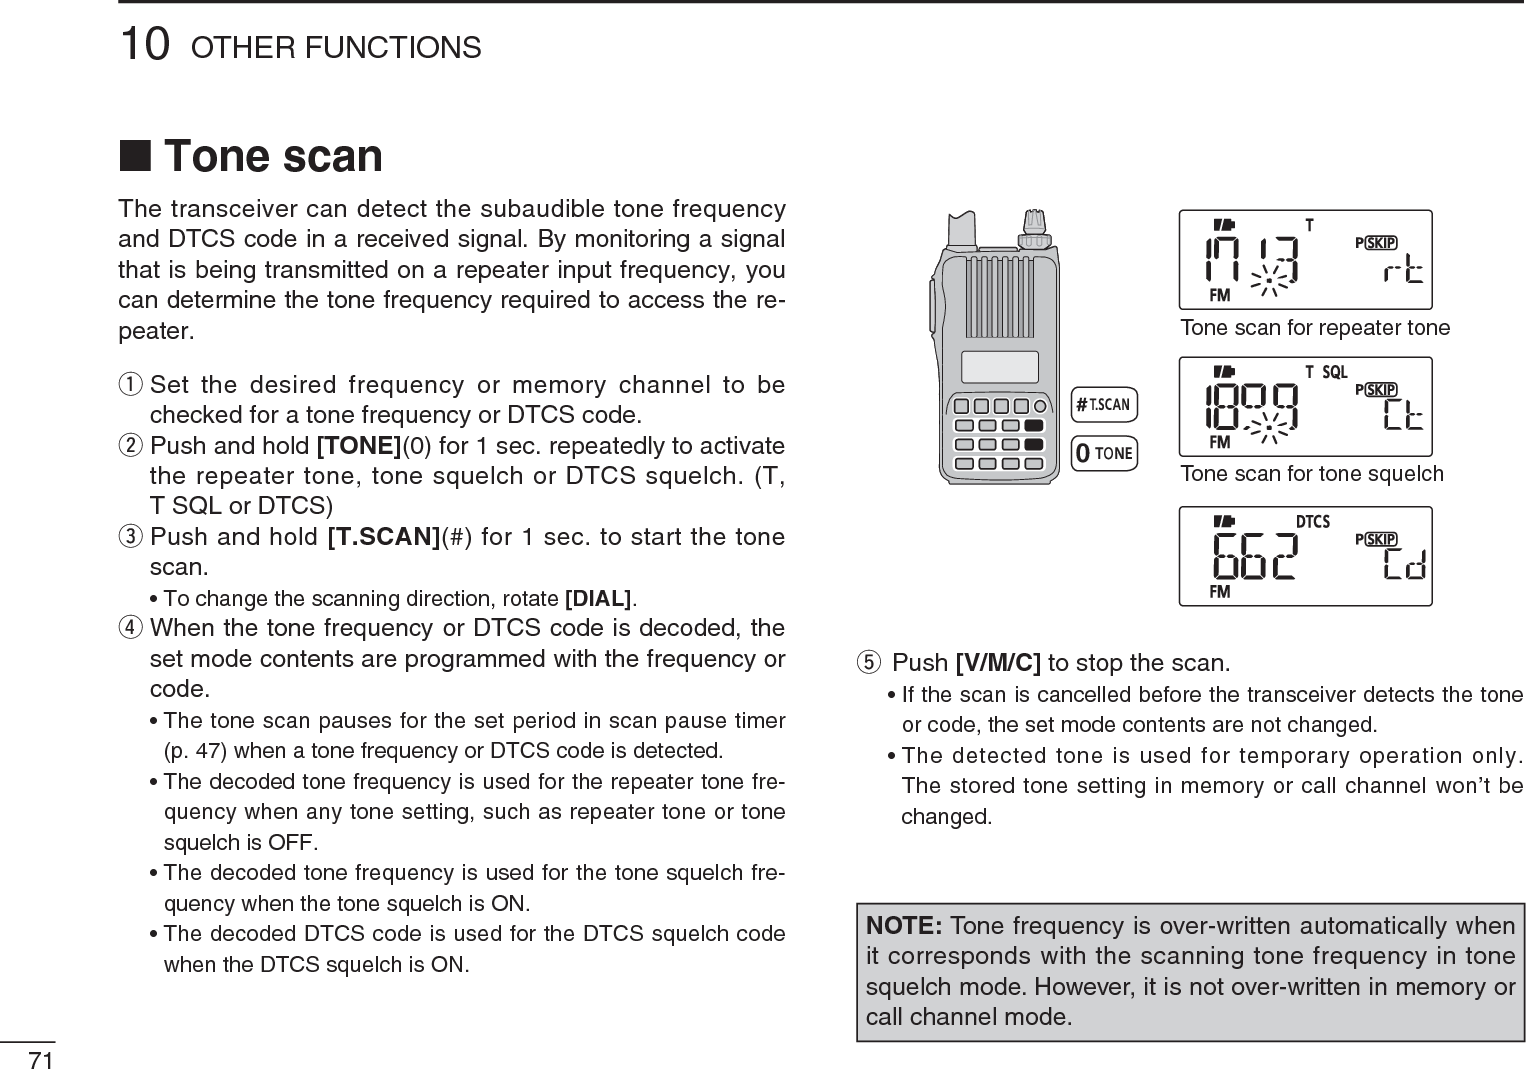 N Tone scanThe transceiver can detect the subaudible tone frequency and DTCS code in a received signal. By monitoring a signal that is being transmitted on a repeater input frequency, you can determine the tone frequency required to access the re-peater.q  Set the desired frequency or memory channel to be checked for a tone frequency or DTCS code.w  Push and hold [TONE](0) for 1 sec. repeatedly to activate the repeater tone, tone squelch or DTCS squelch. (T, T SQL or DTCS)e  Push and hold [T.SCAN](#) for 1 sec. to start the tone scan.• To change the scanning direction, rotate [DIAL].r  When the tone frequency or DTCS code is decoded, the set mode contents are programmed with the frequency or code.• The tone scan pauses for the set period in scan pause timer (p. 47) when a tone frequency or DTCS code is detected.• The decoded tone frequency is used for the repeater tone fre-quency when any tone setting, such as repeater tone or tone squelch is OFF.• The decoded tone frequency is used for the tone squelch fre-quency when the tone squelch is ON.• The decoded DTCS code is used for the DTCS squelch code when the DTCS squelch is ON.Tone scan for repeater toneTone scan for tone squelchtPush [V/M/C] to stop the scan.• If the scan is cancelled before the transceiver detects the tone or code, the set mode contents are not changed.• The detected tone is used for temporary operation only. The stored tone setting in memory or call channel won’t be changed.7110 OTHER FUNCTIONSNOTE: Tone frequency is over-written automatically when it corresponds with the scanning tone frequency in tone squelch mode. However, it is not over-written in memory or call channel mode.